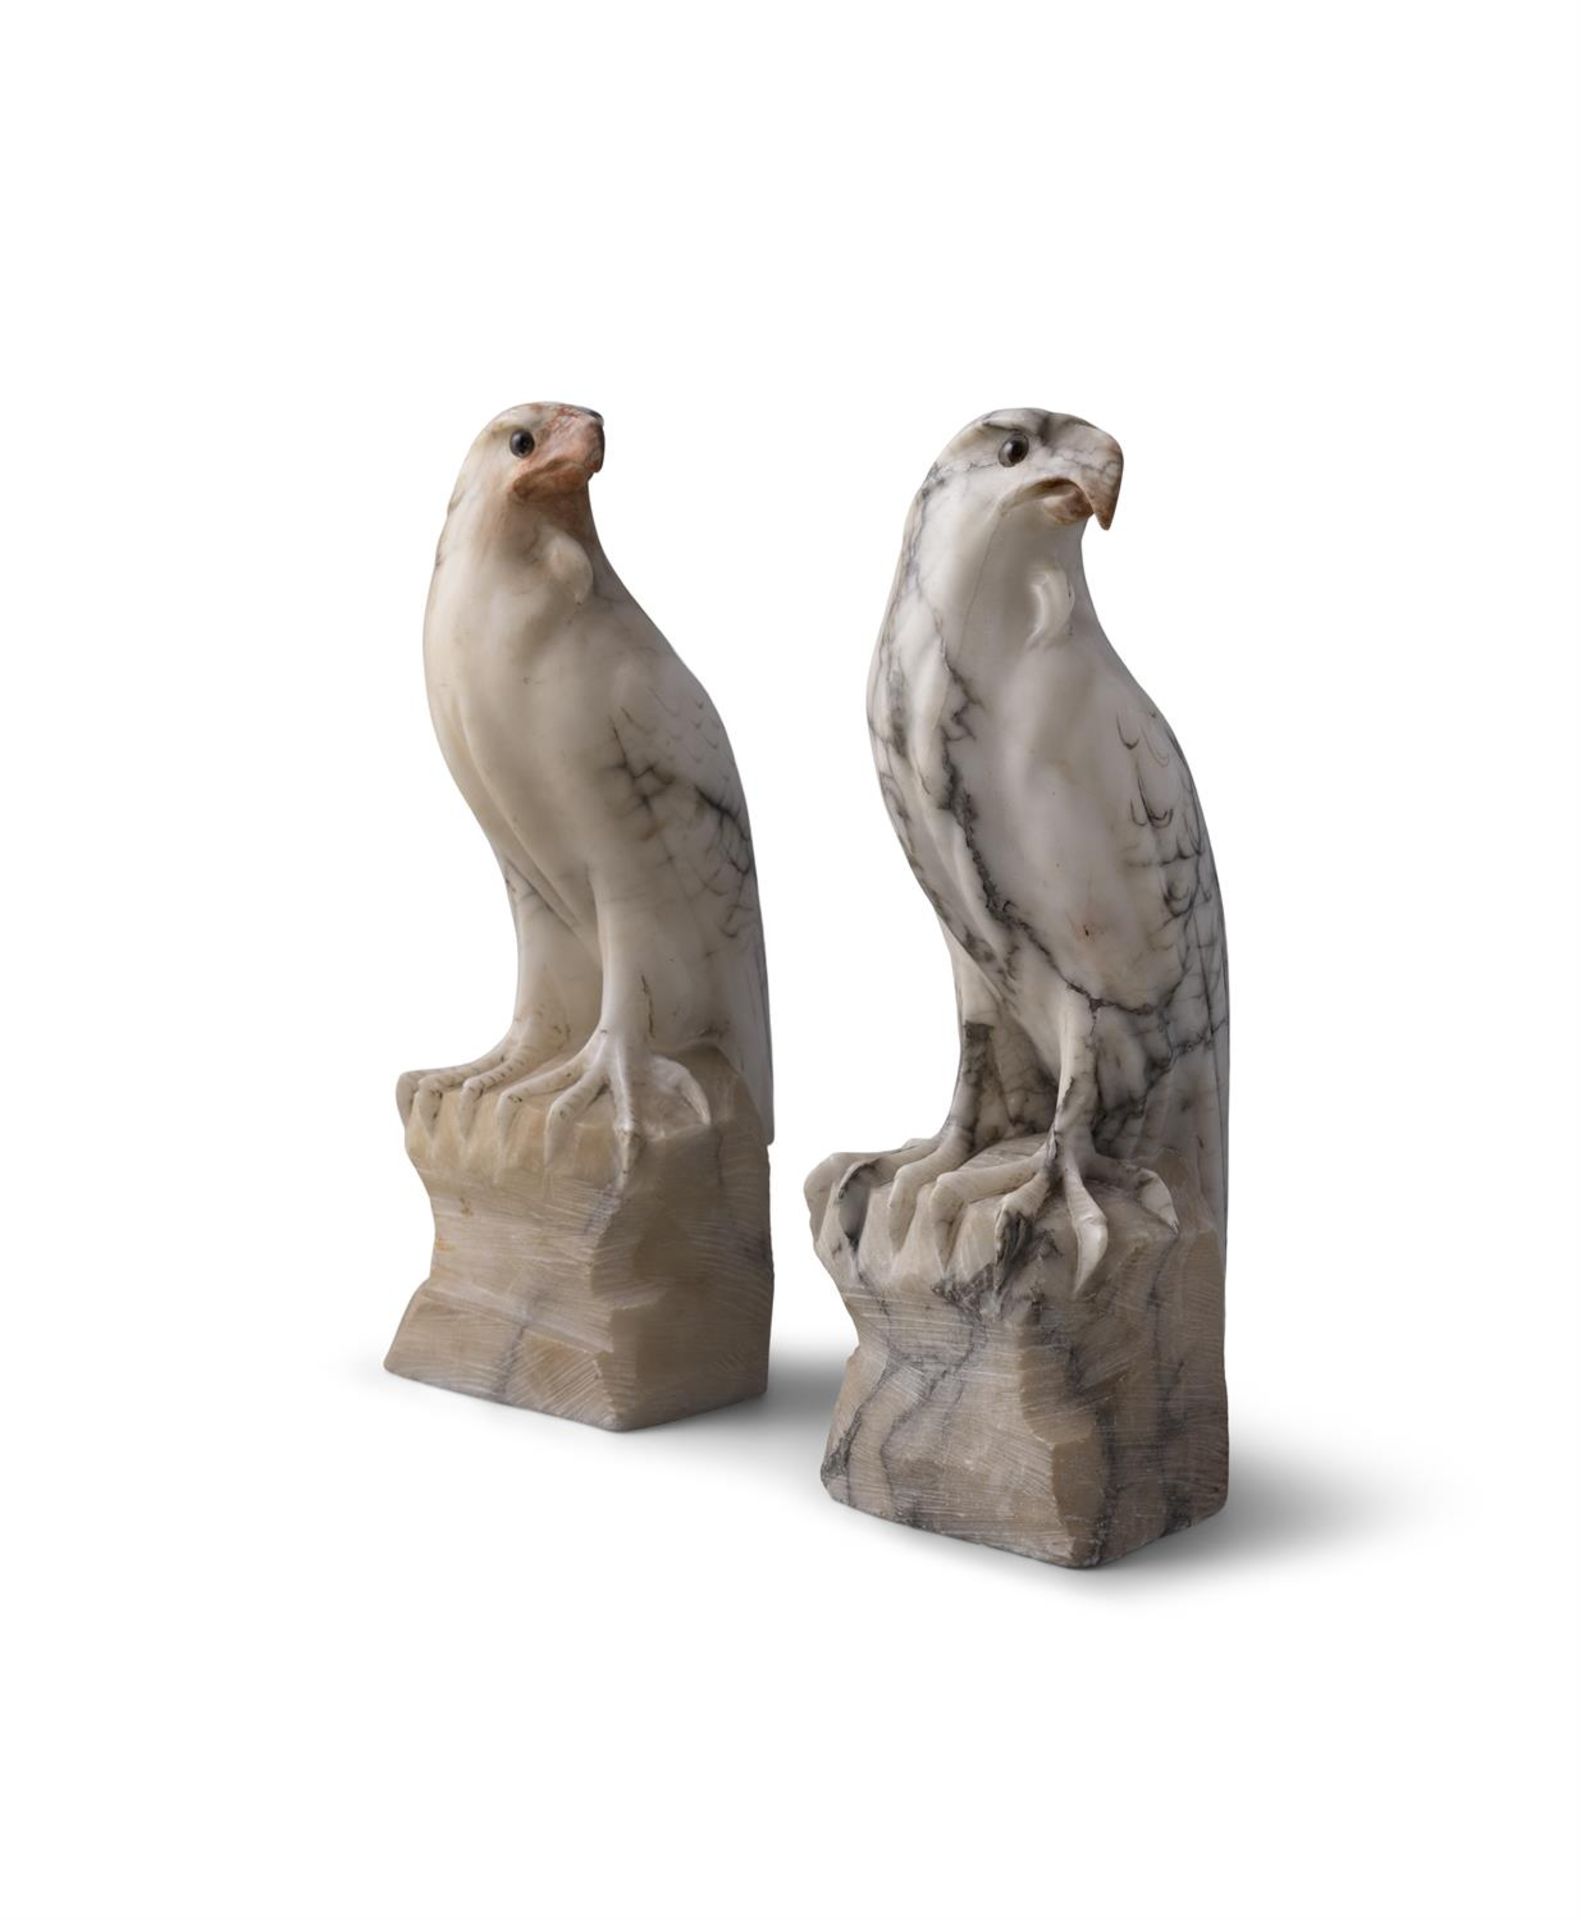 A PAIR OF CARVED WHITE VARIEGATED MARBLE MODELS OF HAWKS PERCHED ON ROCKY OUTCROPS. 31cm high - Image 3 of 4